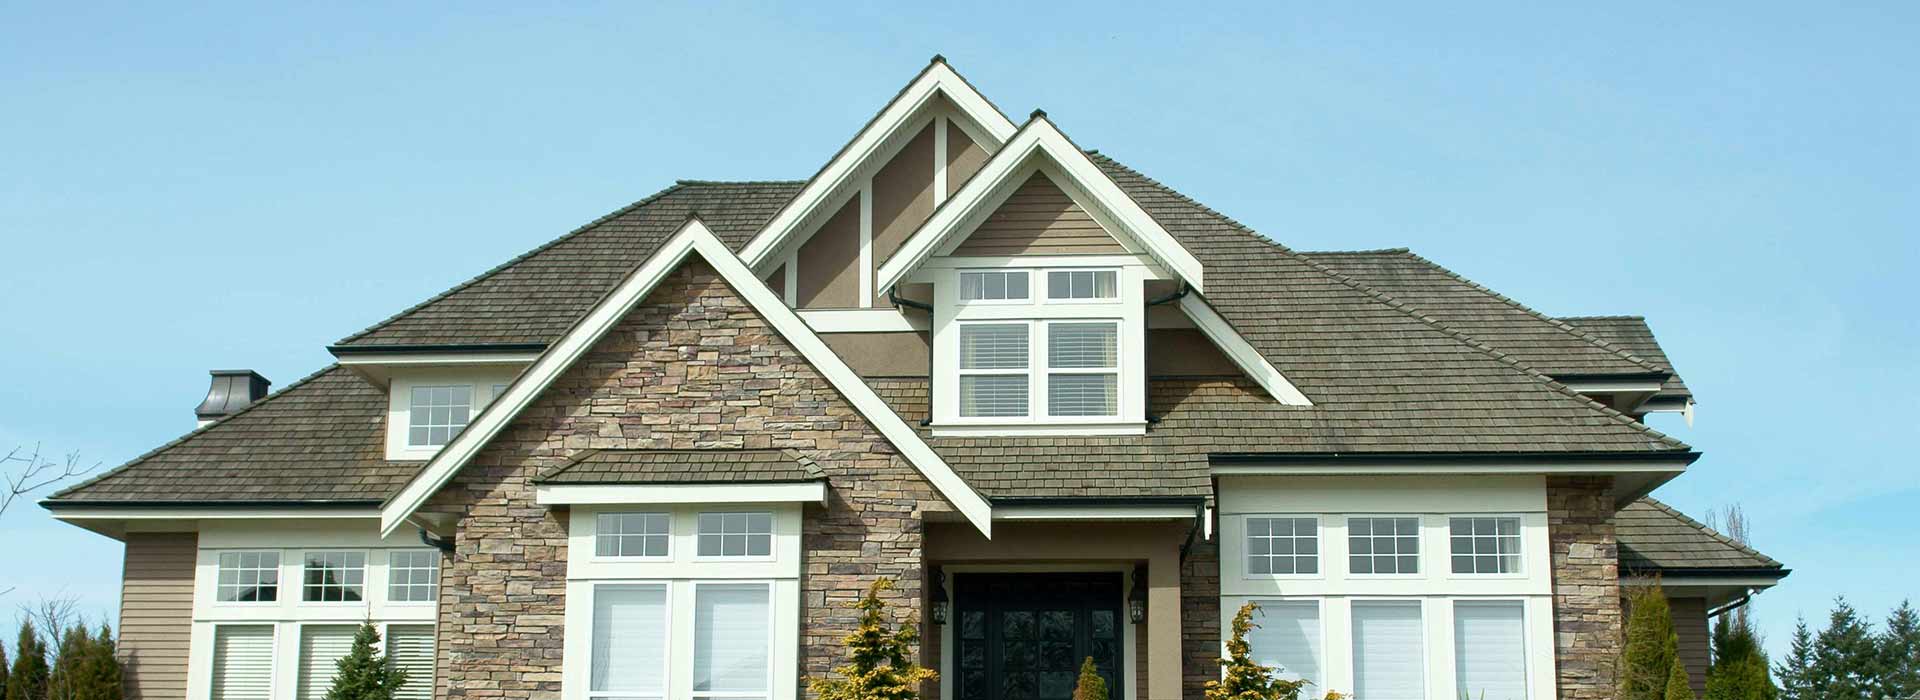 Residential Roofing in Shelton, WA